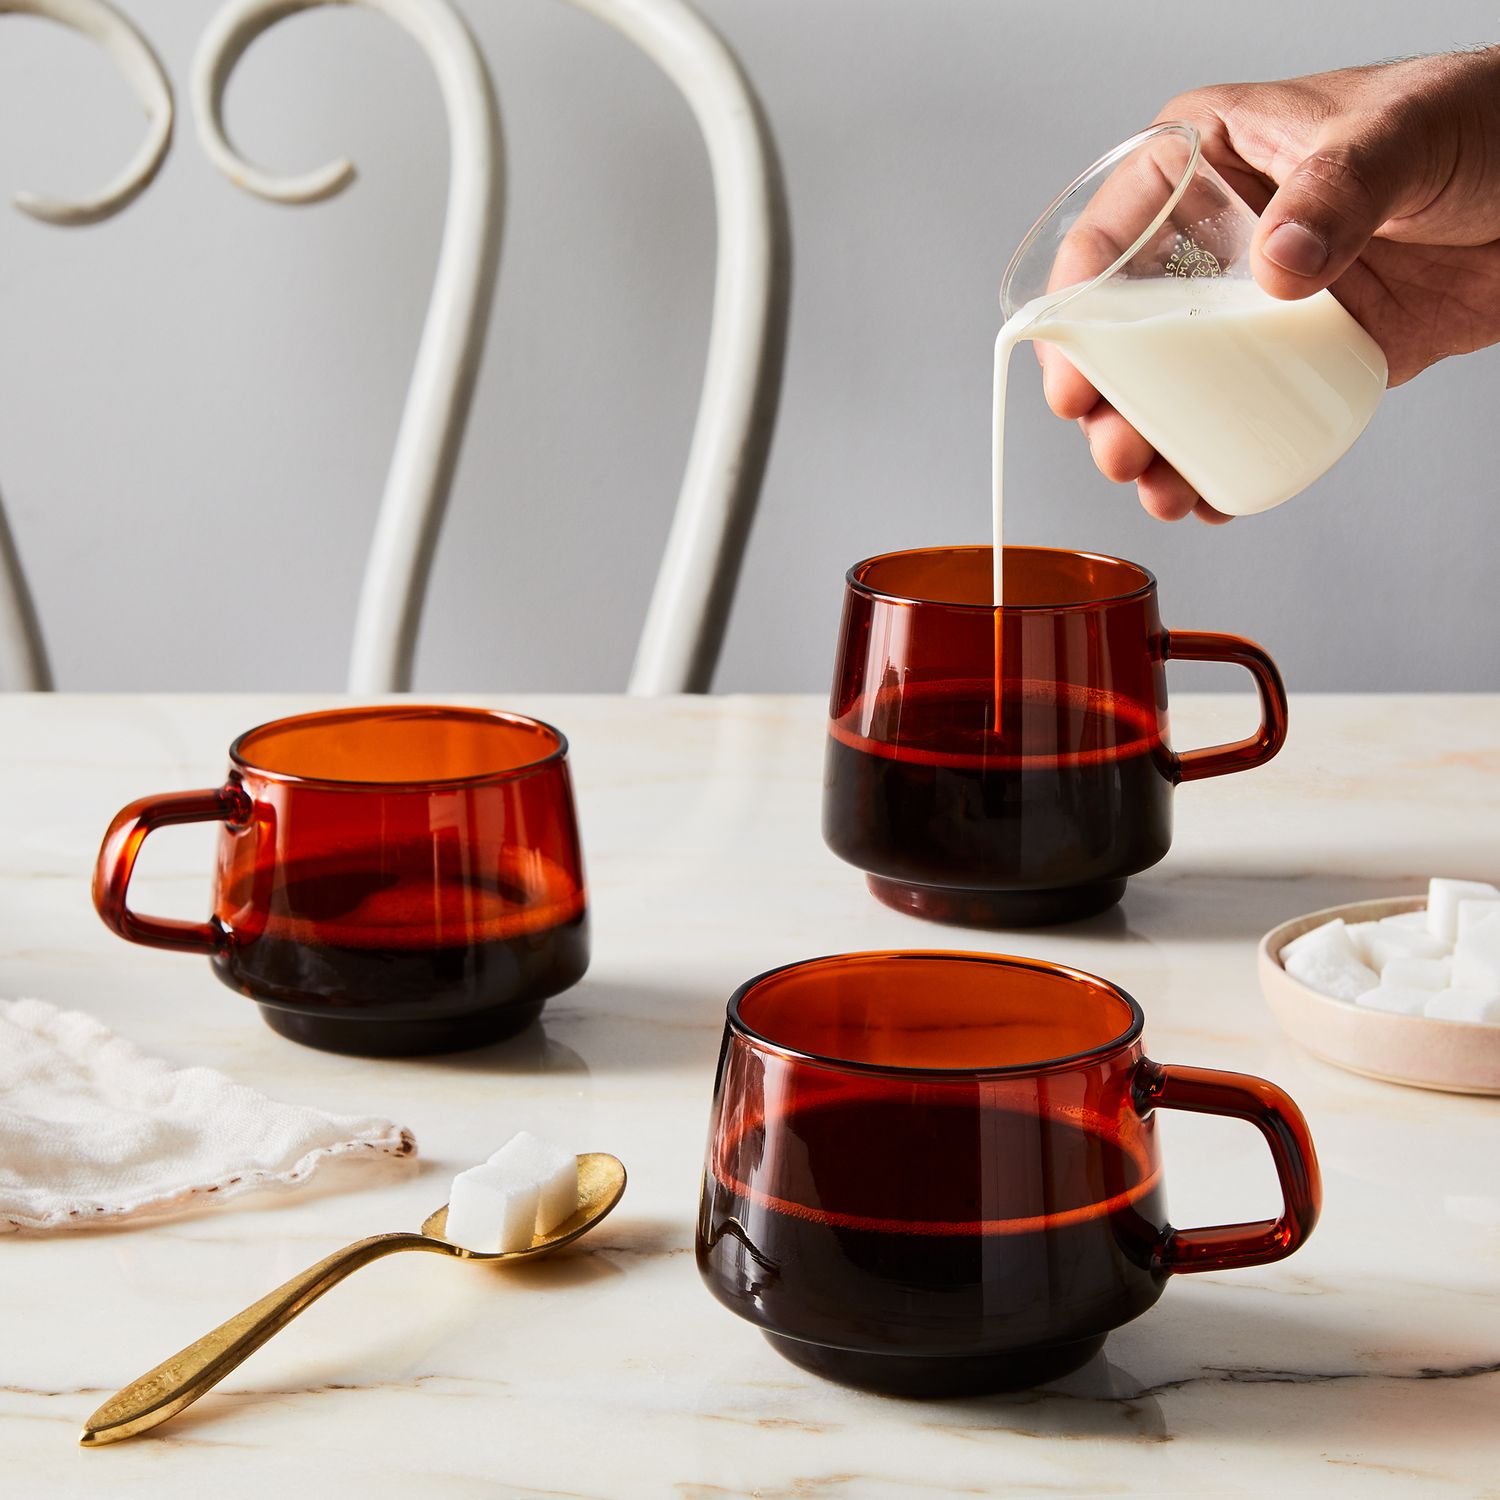 Kinto Color-Dipped Japanese Mugs (Set of 2) in 3 Colors, Porcelain, Made in  Japan on Food52